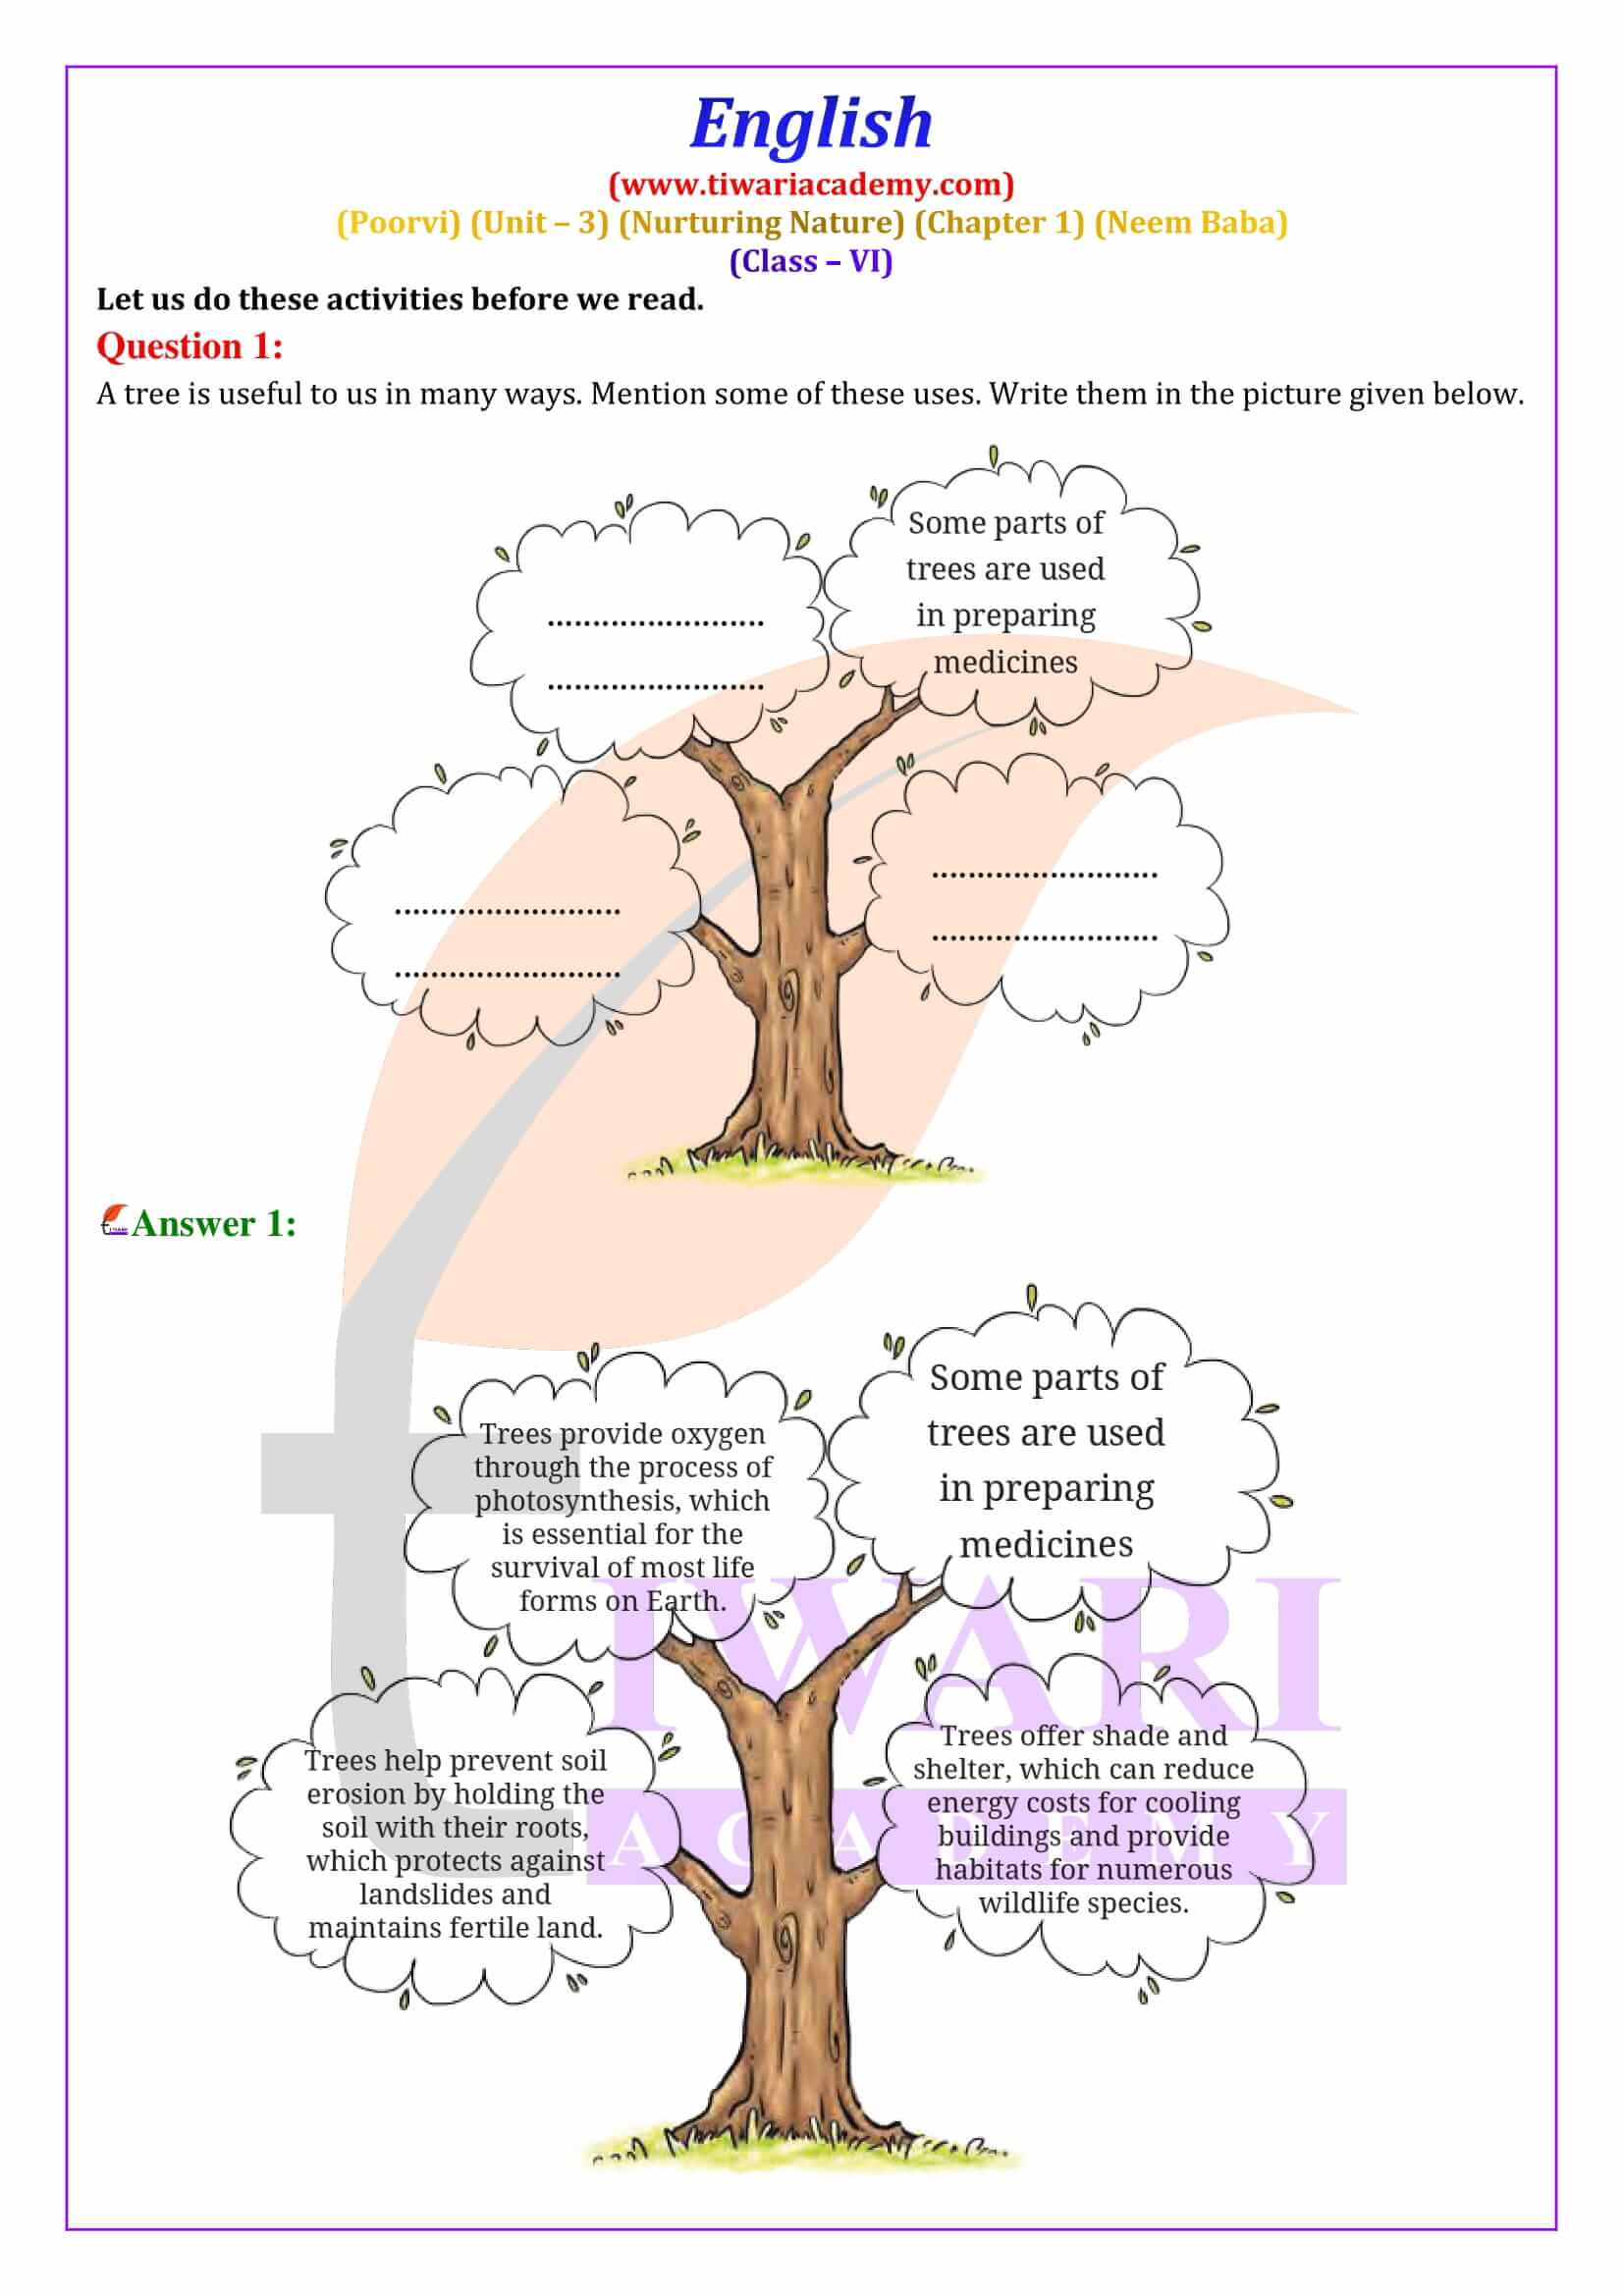 NCERT Solutions for Class 6 English Poorvi Unit 3 Nurturing Nature Chapter 1 Neem Baba